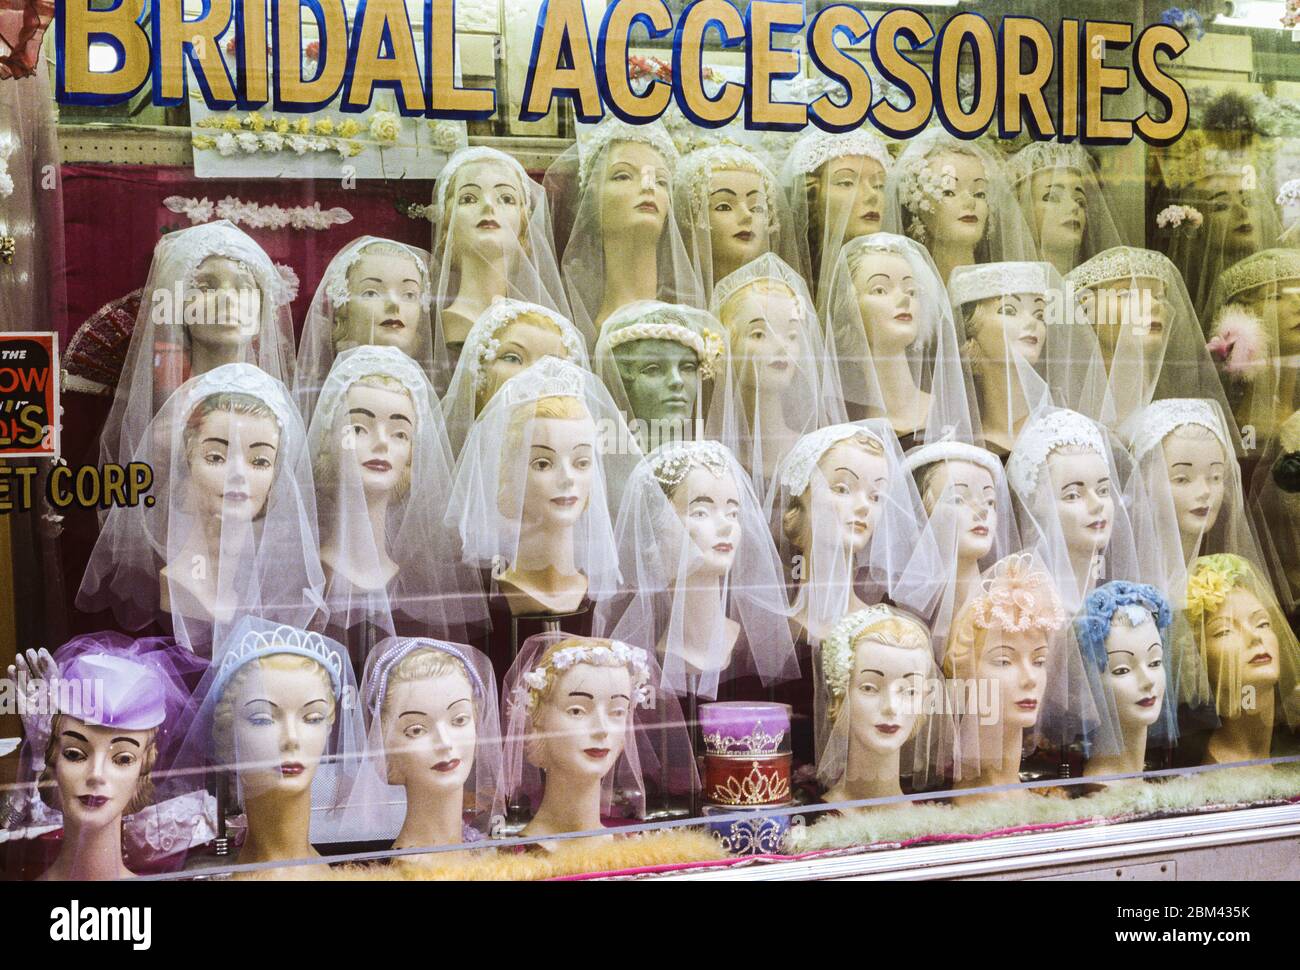 Bridal accessories in a window display on 57th Street in New York City sometime in the mid-1970's. Stock Photo